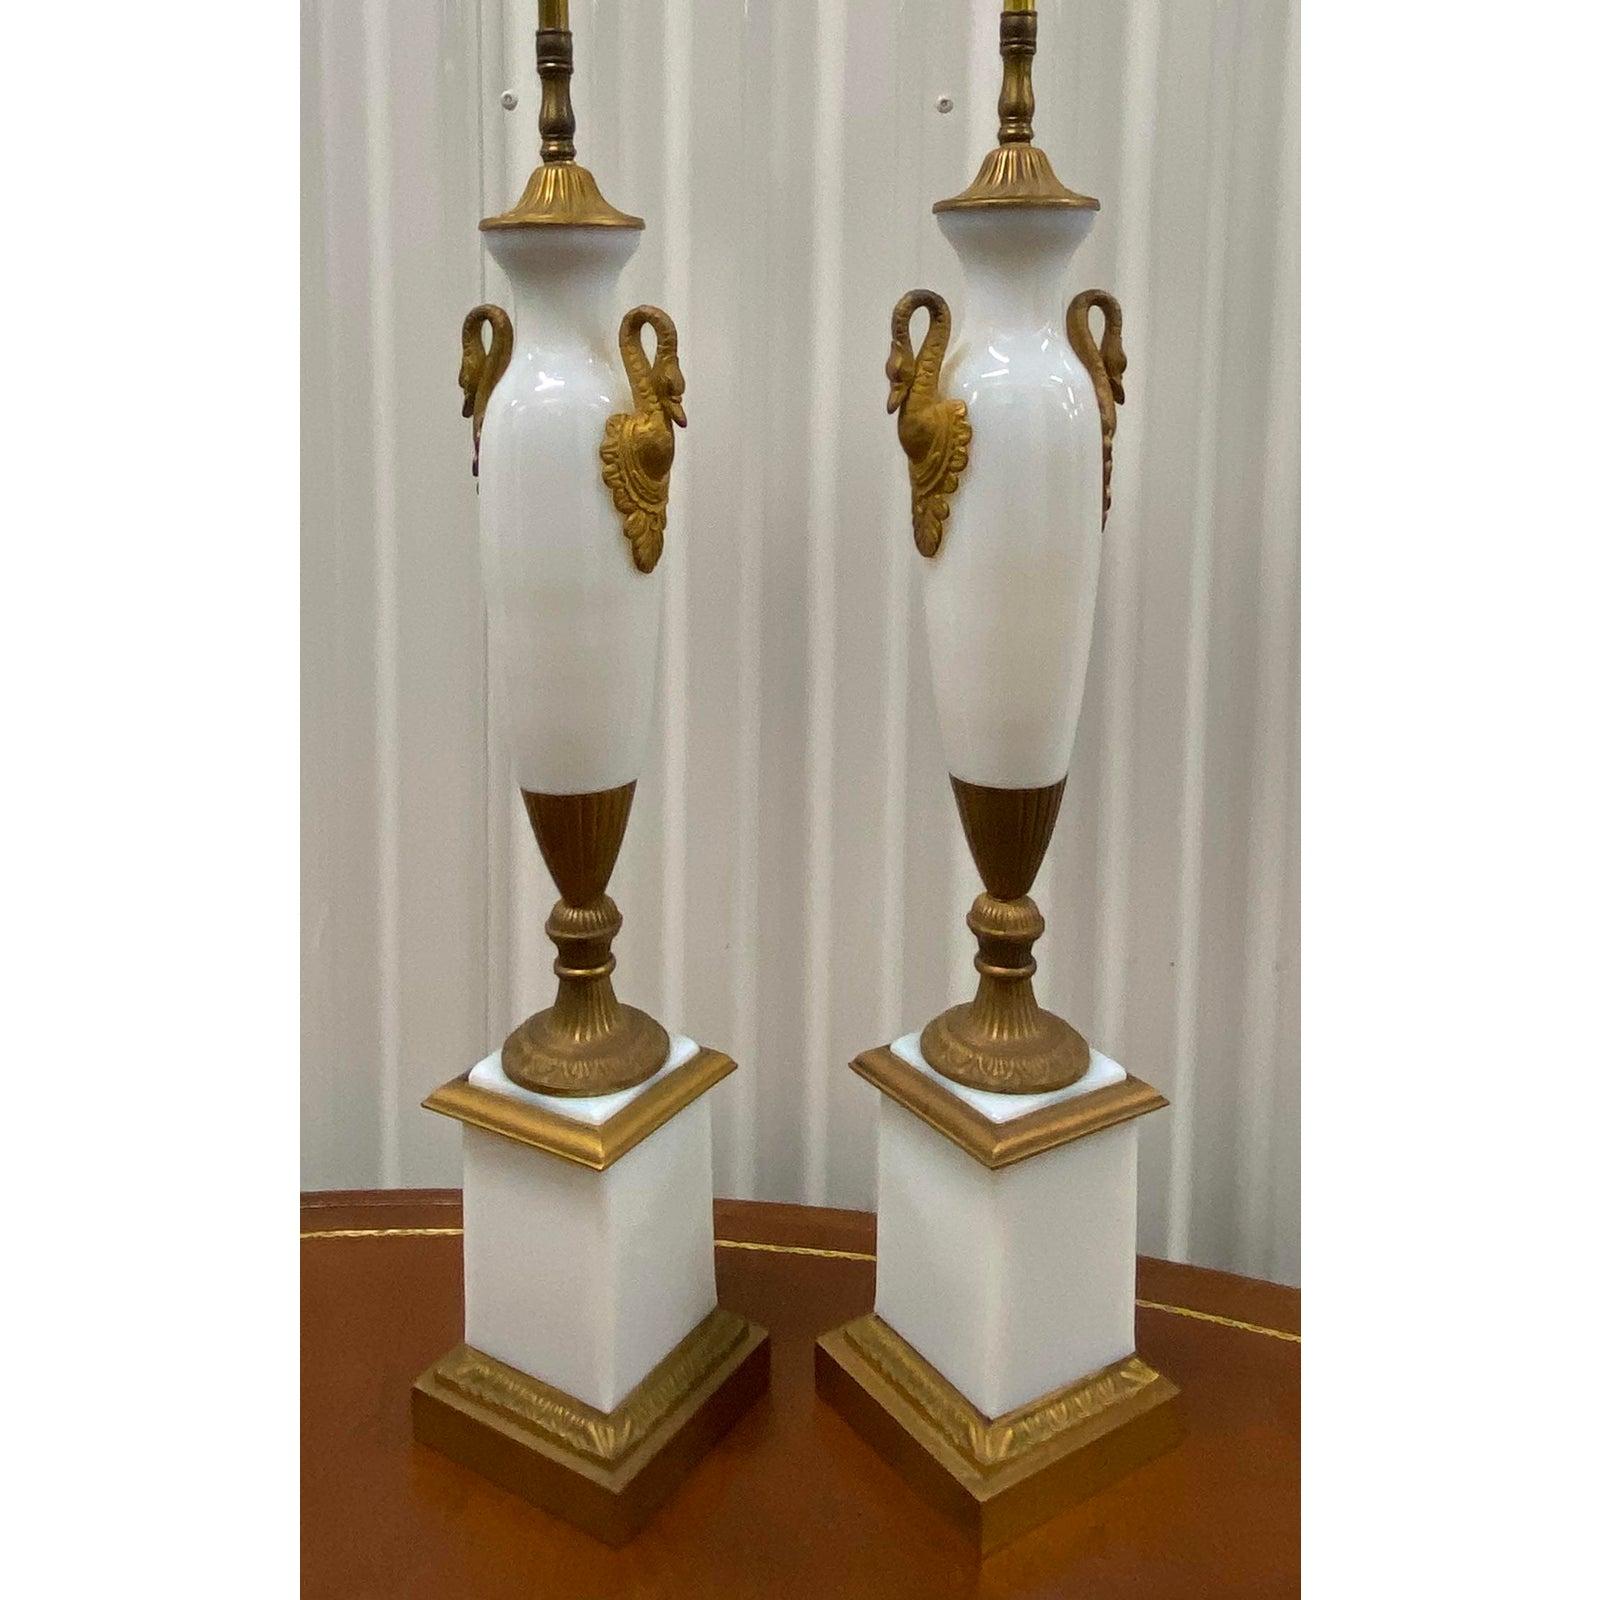 Pair of elegant opaline glass table lamps with gilded brass ormolu mounts, circa 1940

These are absolutely gorgeous!

The lamps sit atop a square column base capped with gilded brass mounts. The main body of each lamp shows a pair of gilded